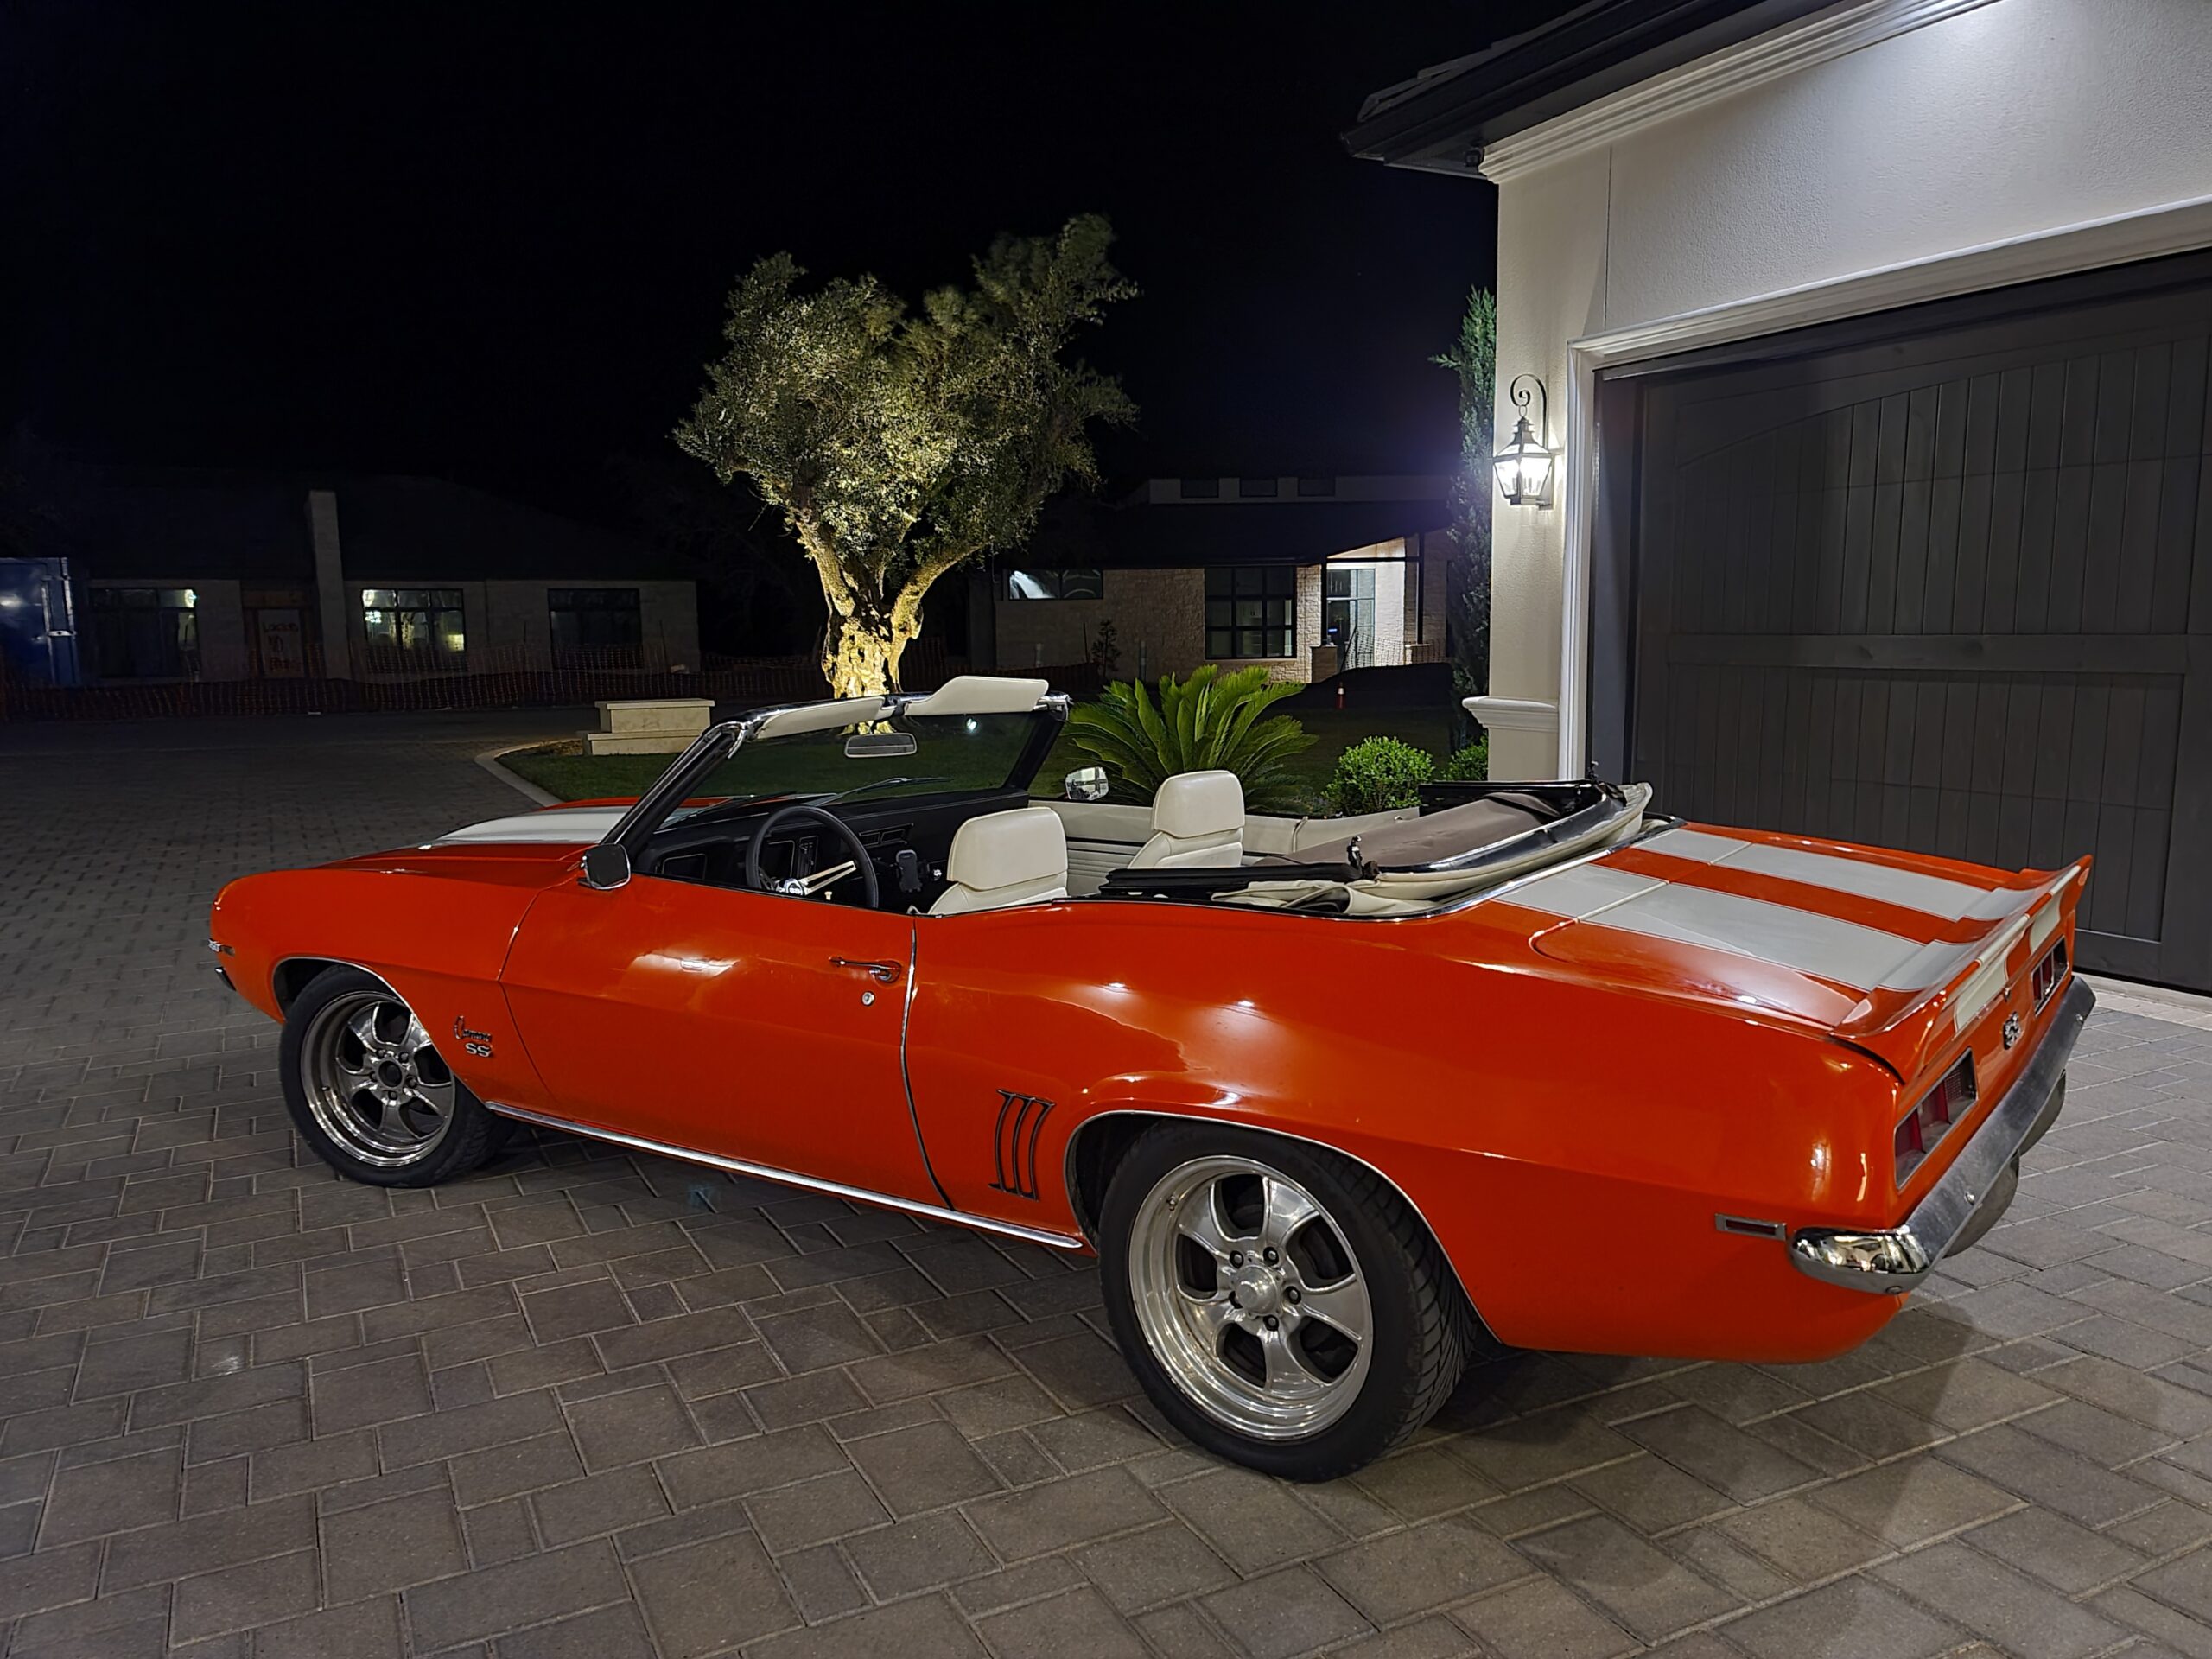 A red convertible car with white stripes is parked in a driveway at night. The house and garage are lit, and an illuminated tree is visible in the background.